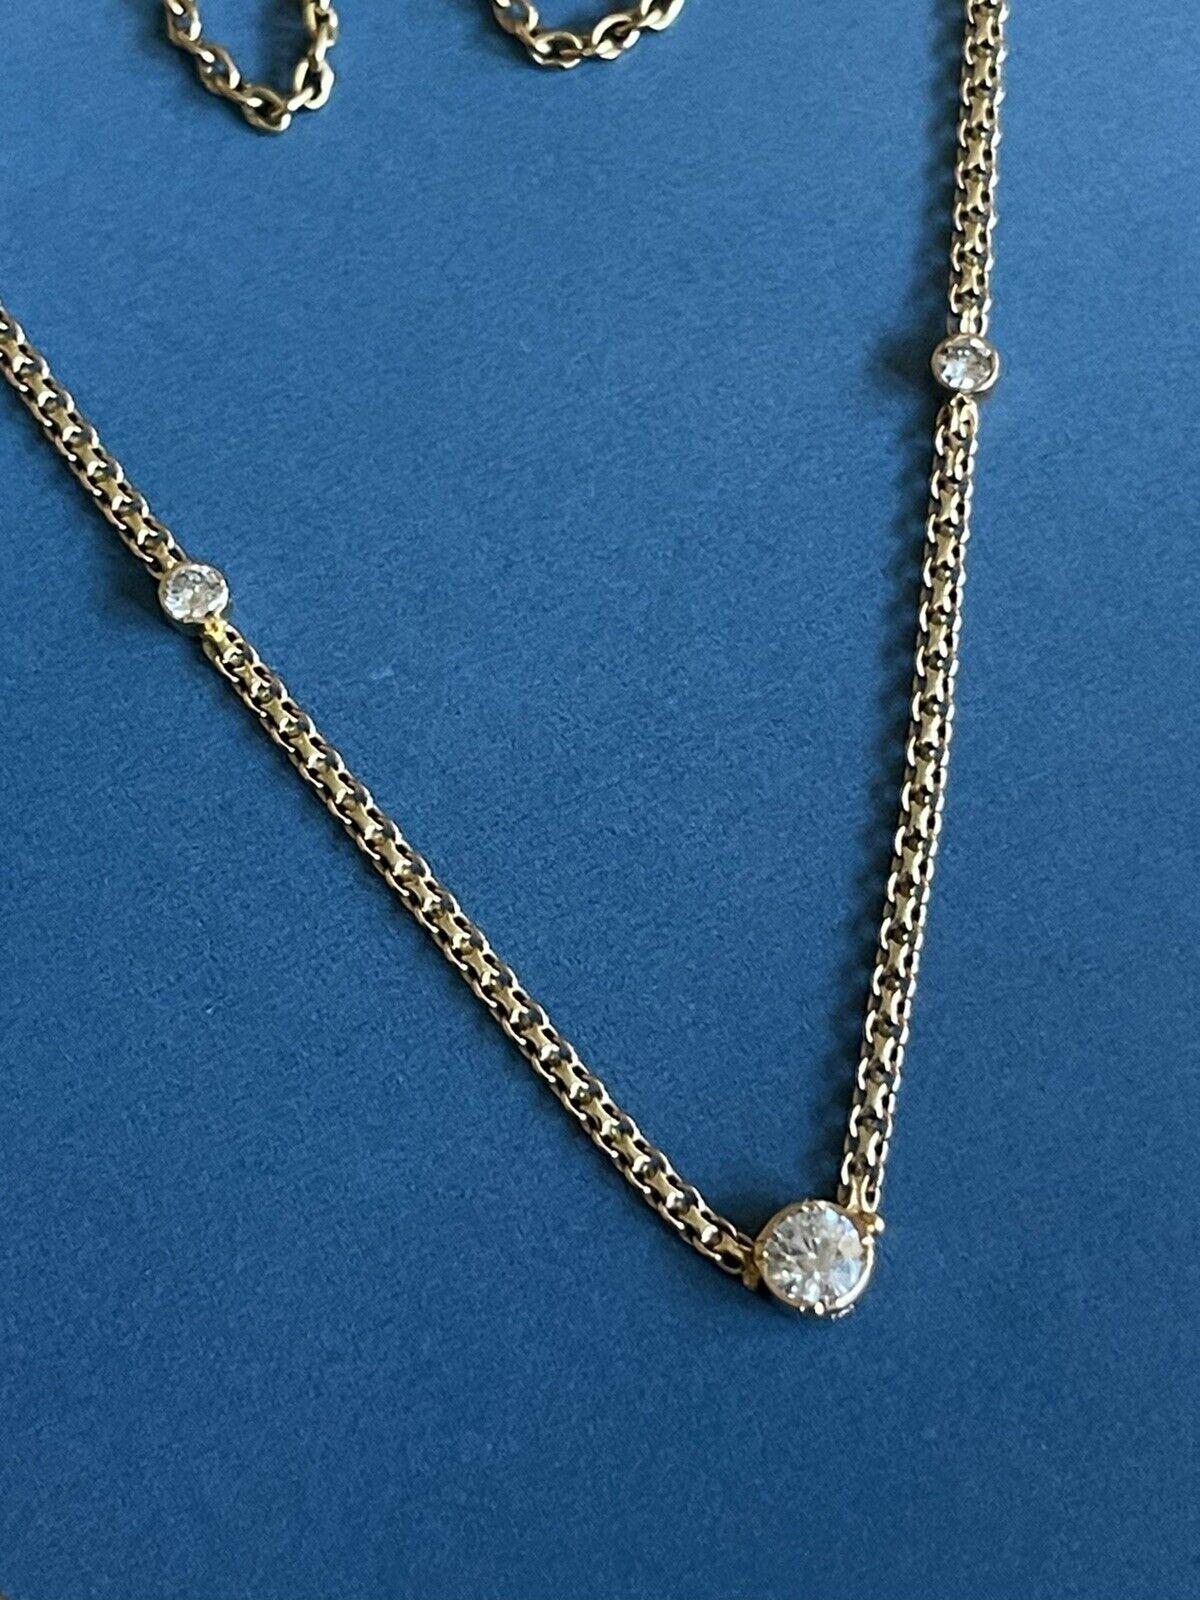 

High jewellery designer piece right from heart of London Hatton Garden

17 inch long special woven chain fully embellished with SI clarity sparkling solitaire station diamonds totalling 0.70ct in bezel set

Hallmarked 750

At just under 5g, we’ll